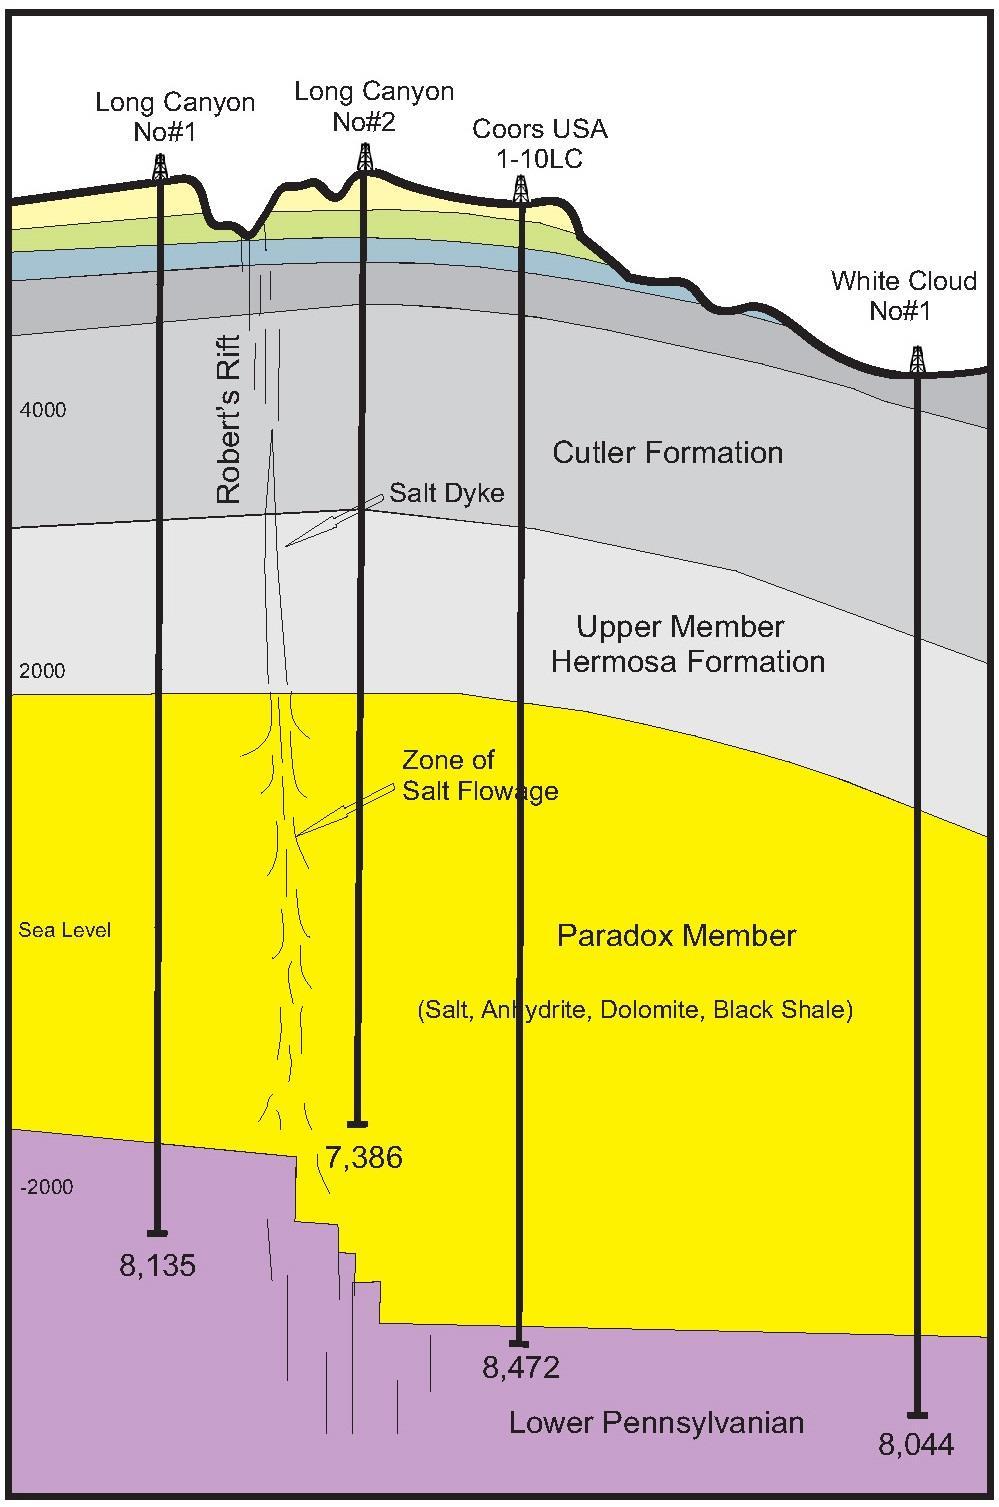 The additional claims are located at both the northern and southern ends of the Project area, and will increase the Exploration Target previously announced.